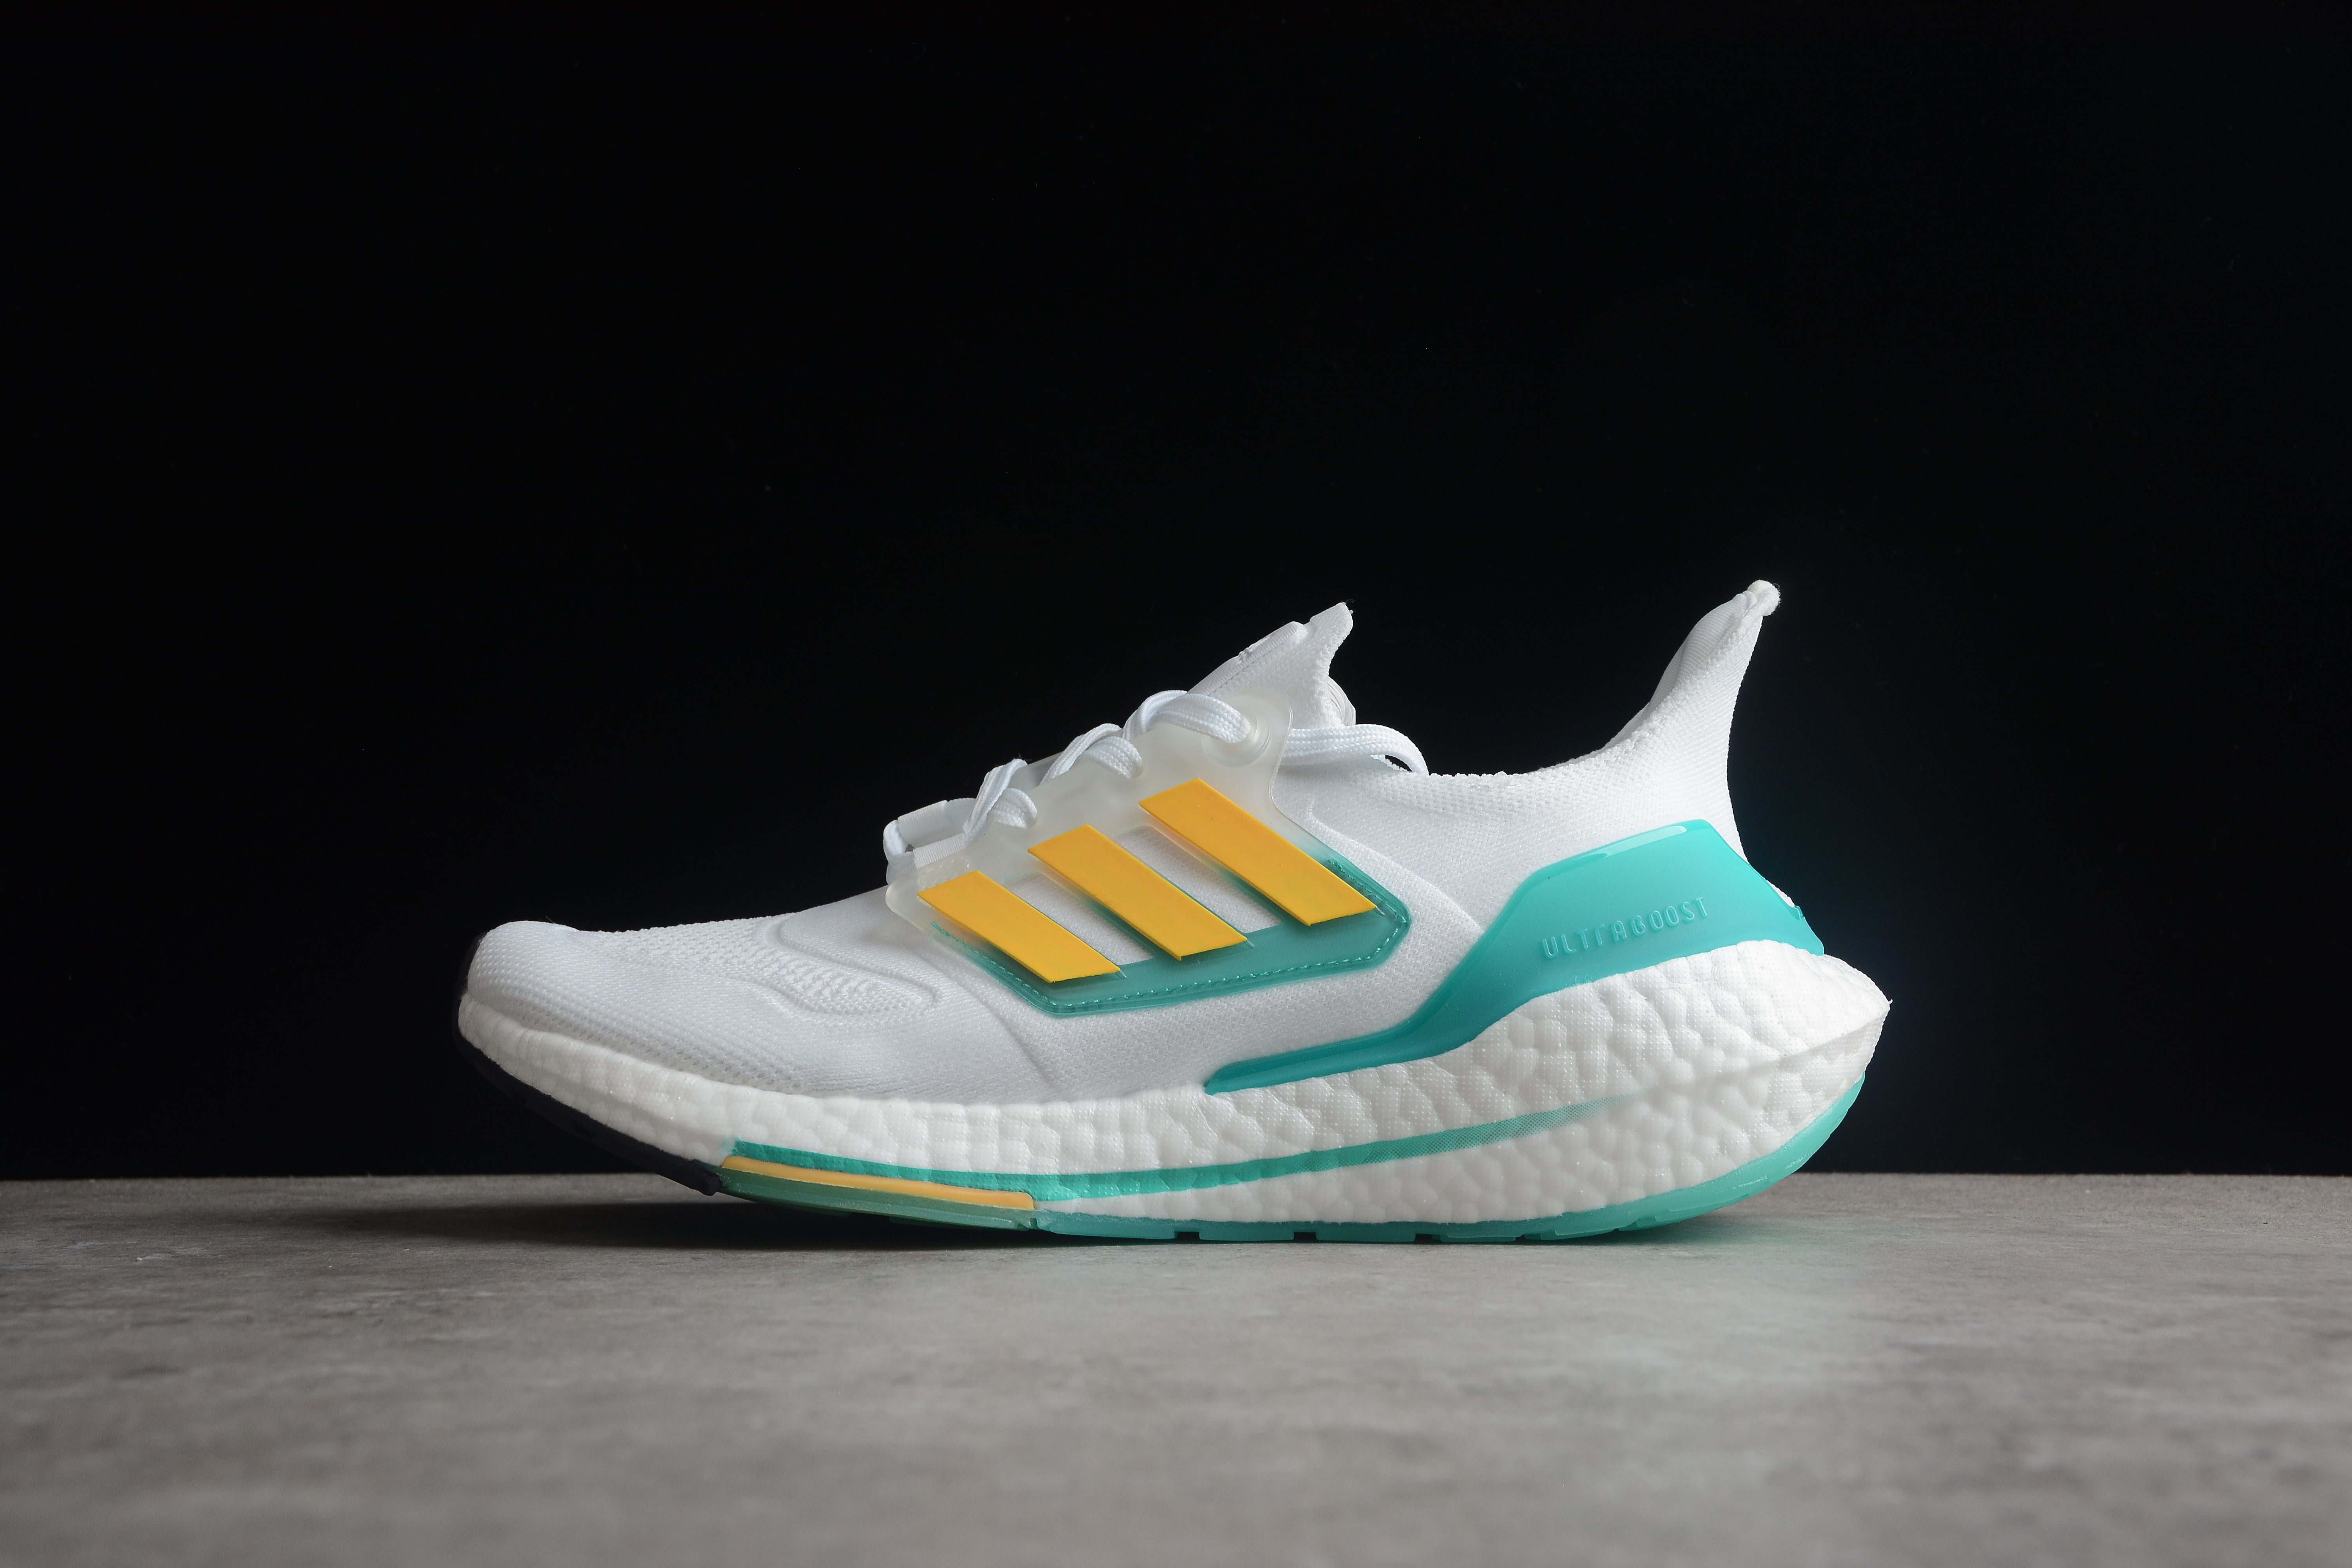 Adidas ultraboost white/blue/yellow  shoes